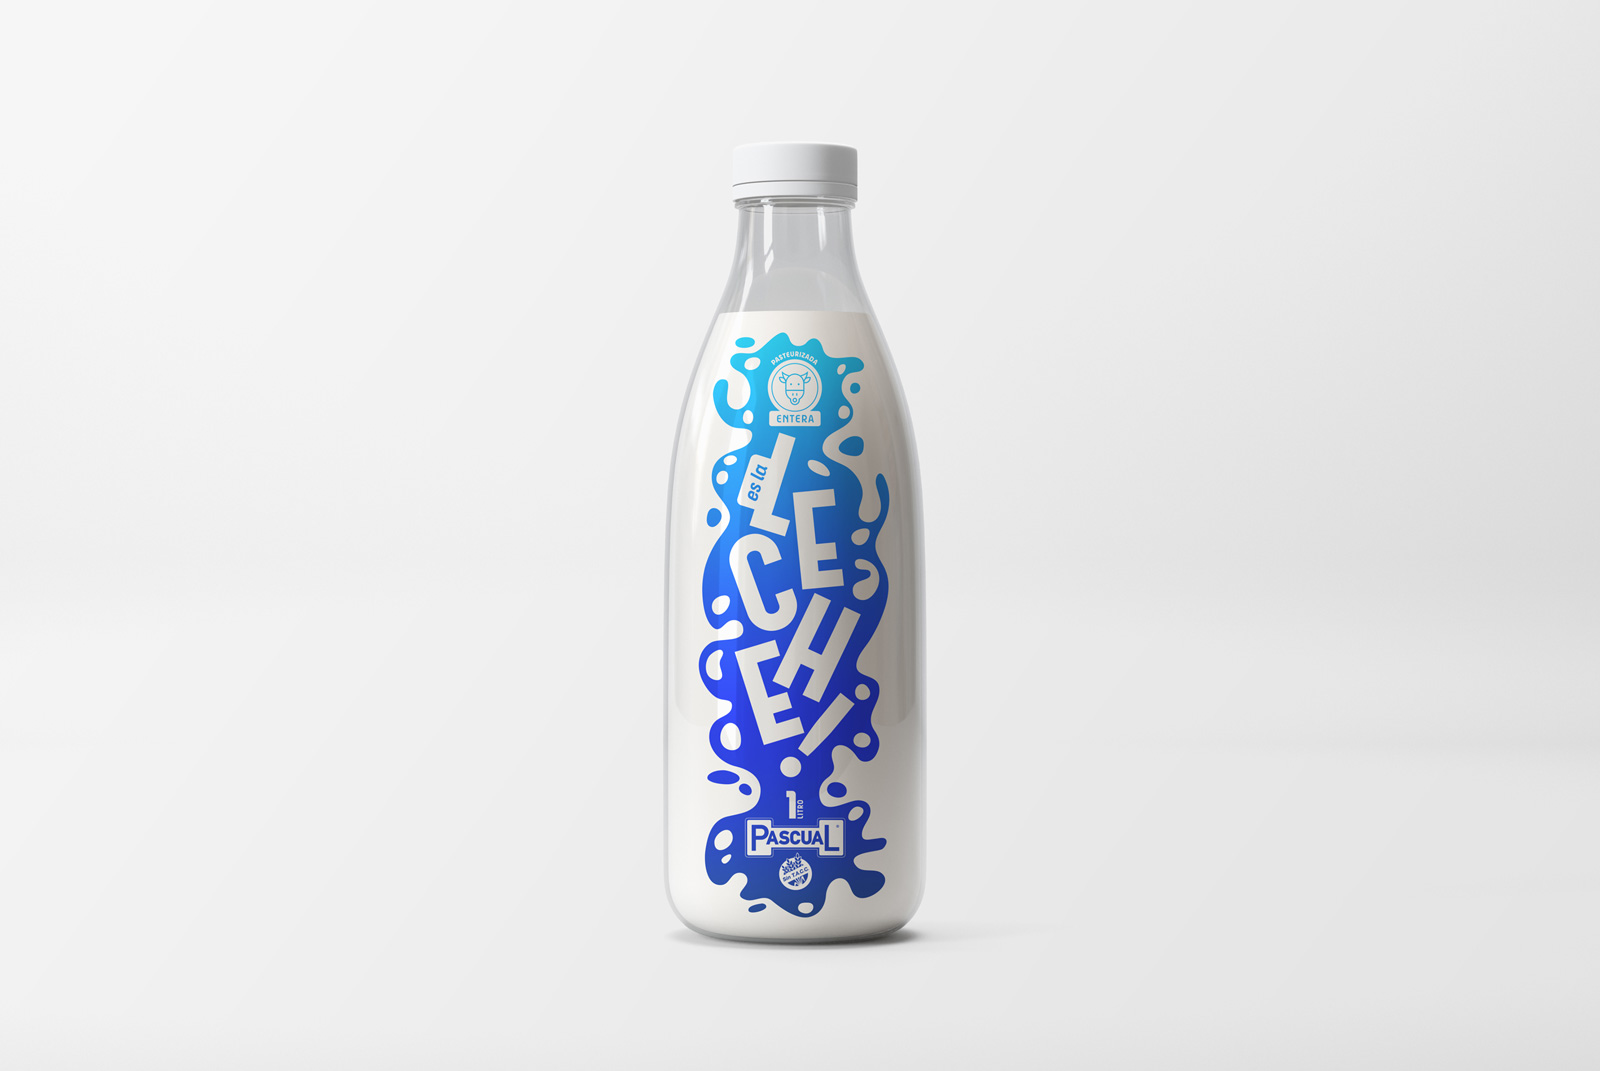 Leche-Pascual-Packaging-03